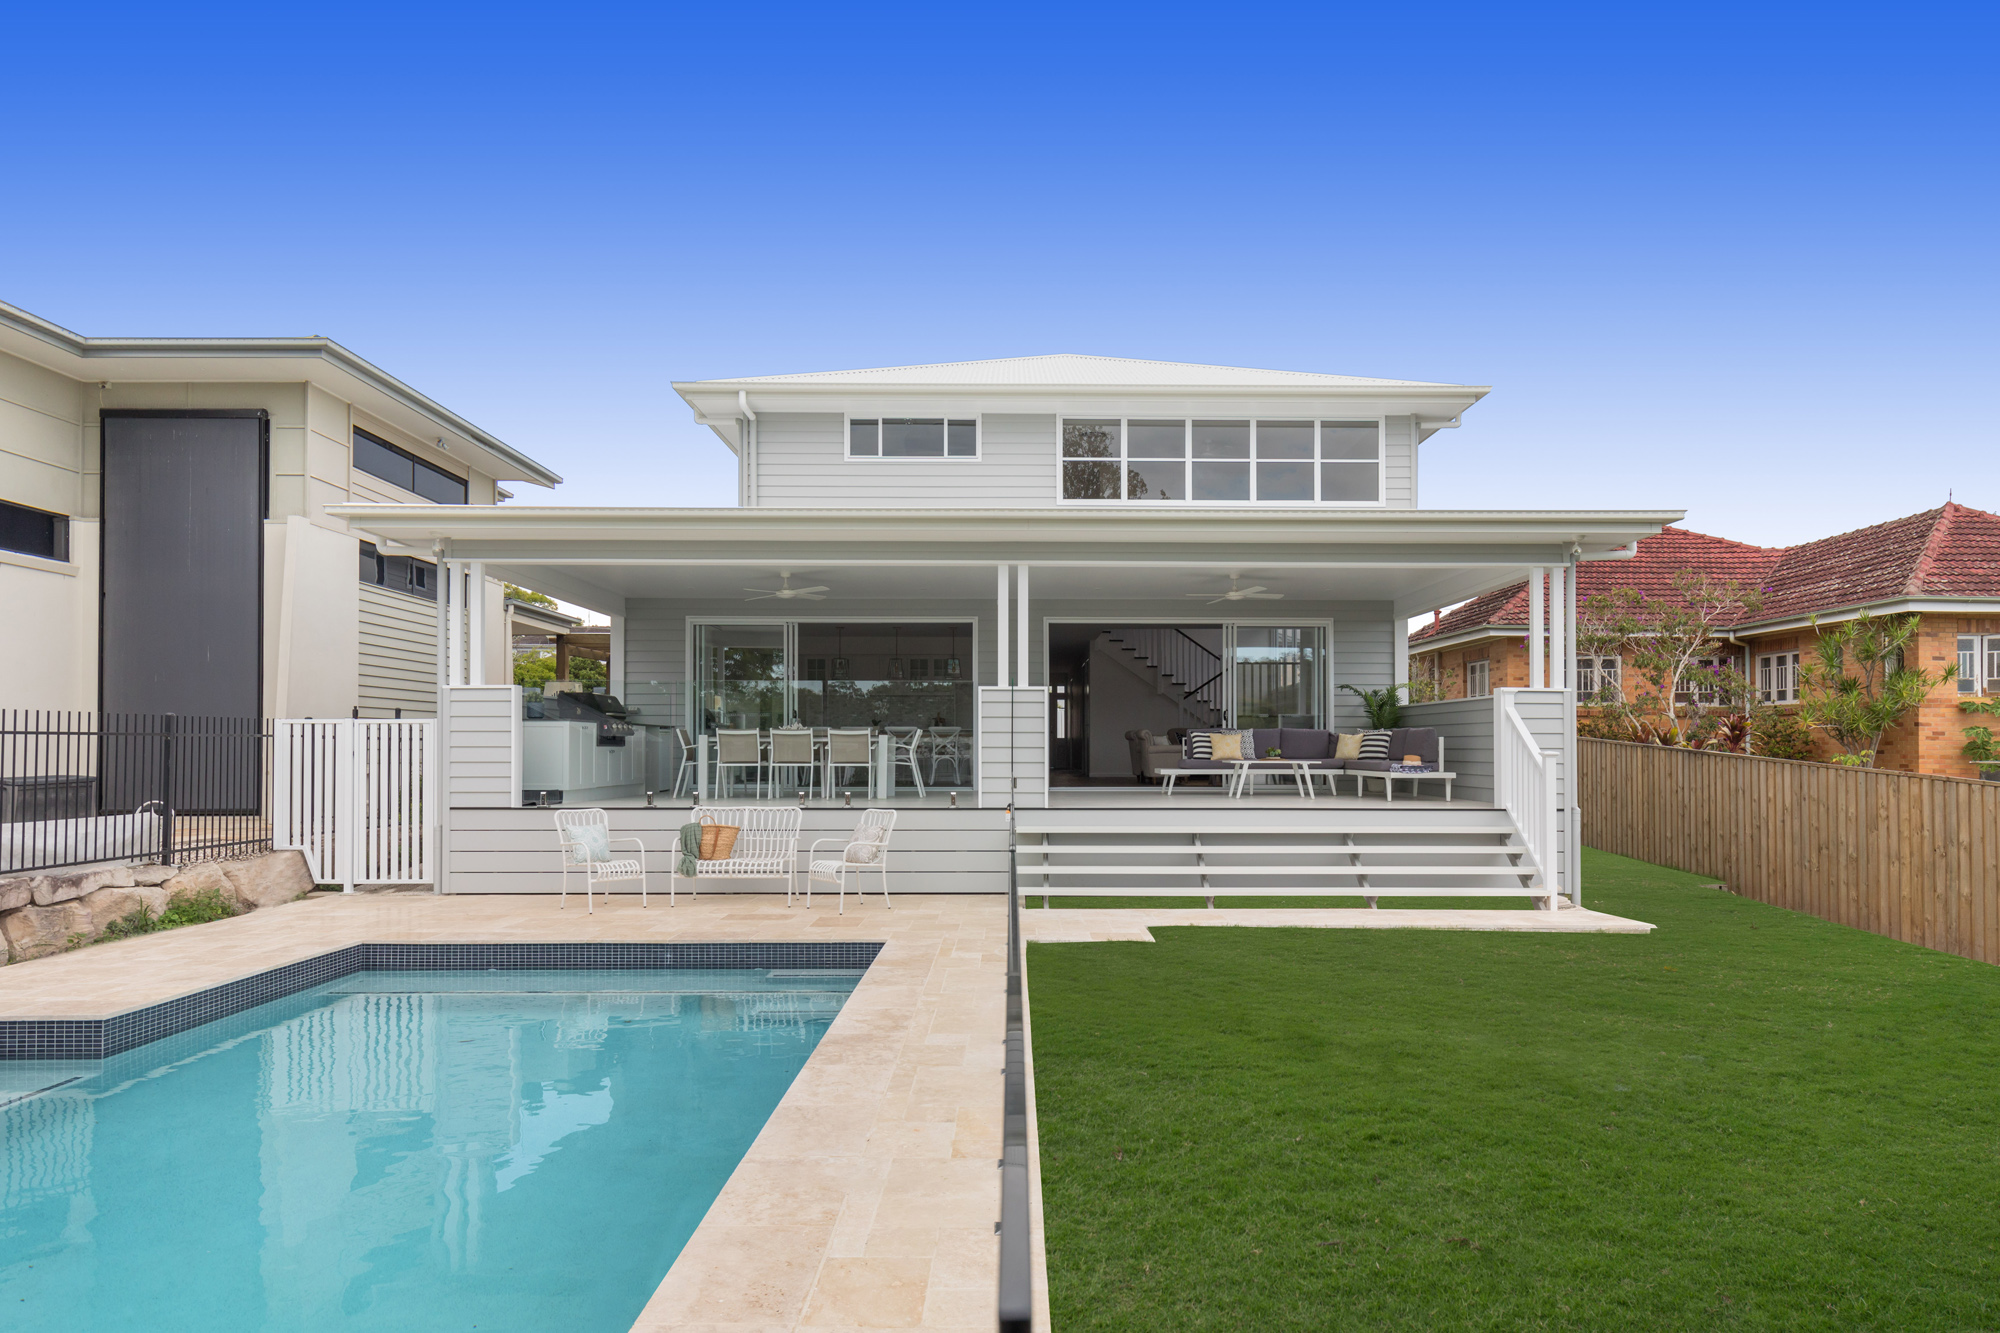 White Hampton and Queenslander style house with a backyard swimming pool